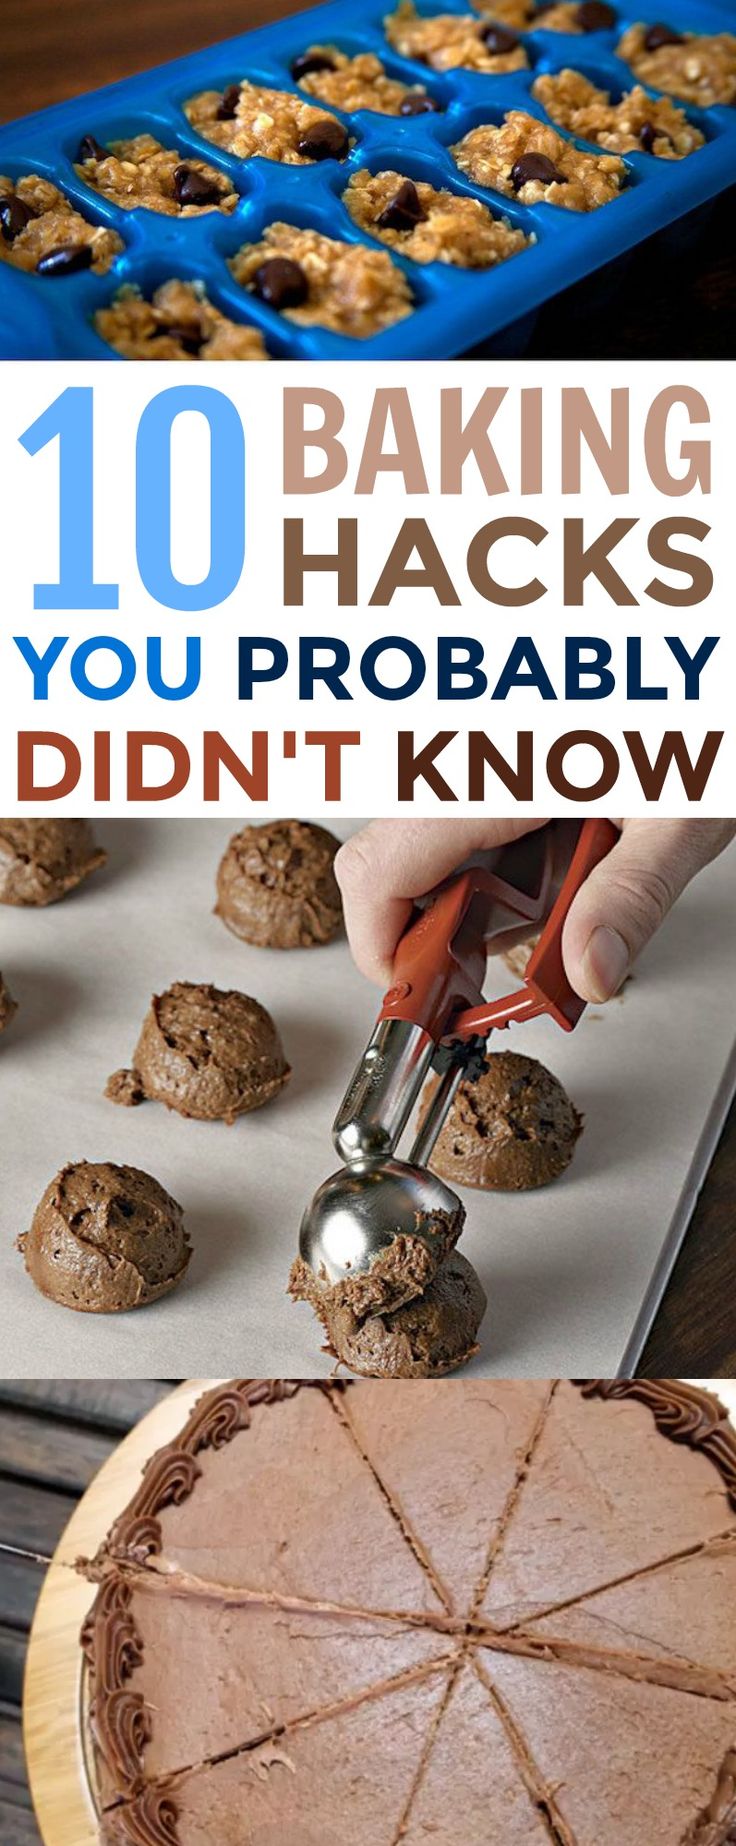 These 10 Baking Hacks You Probably Didn’t Know will surely make you be a bette...